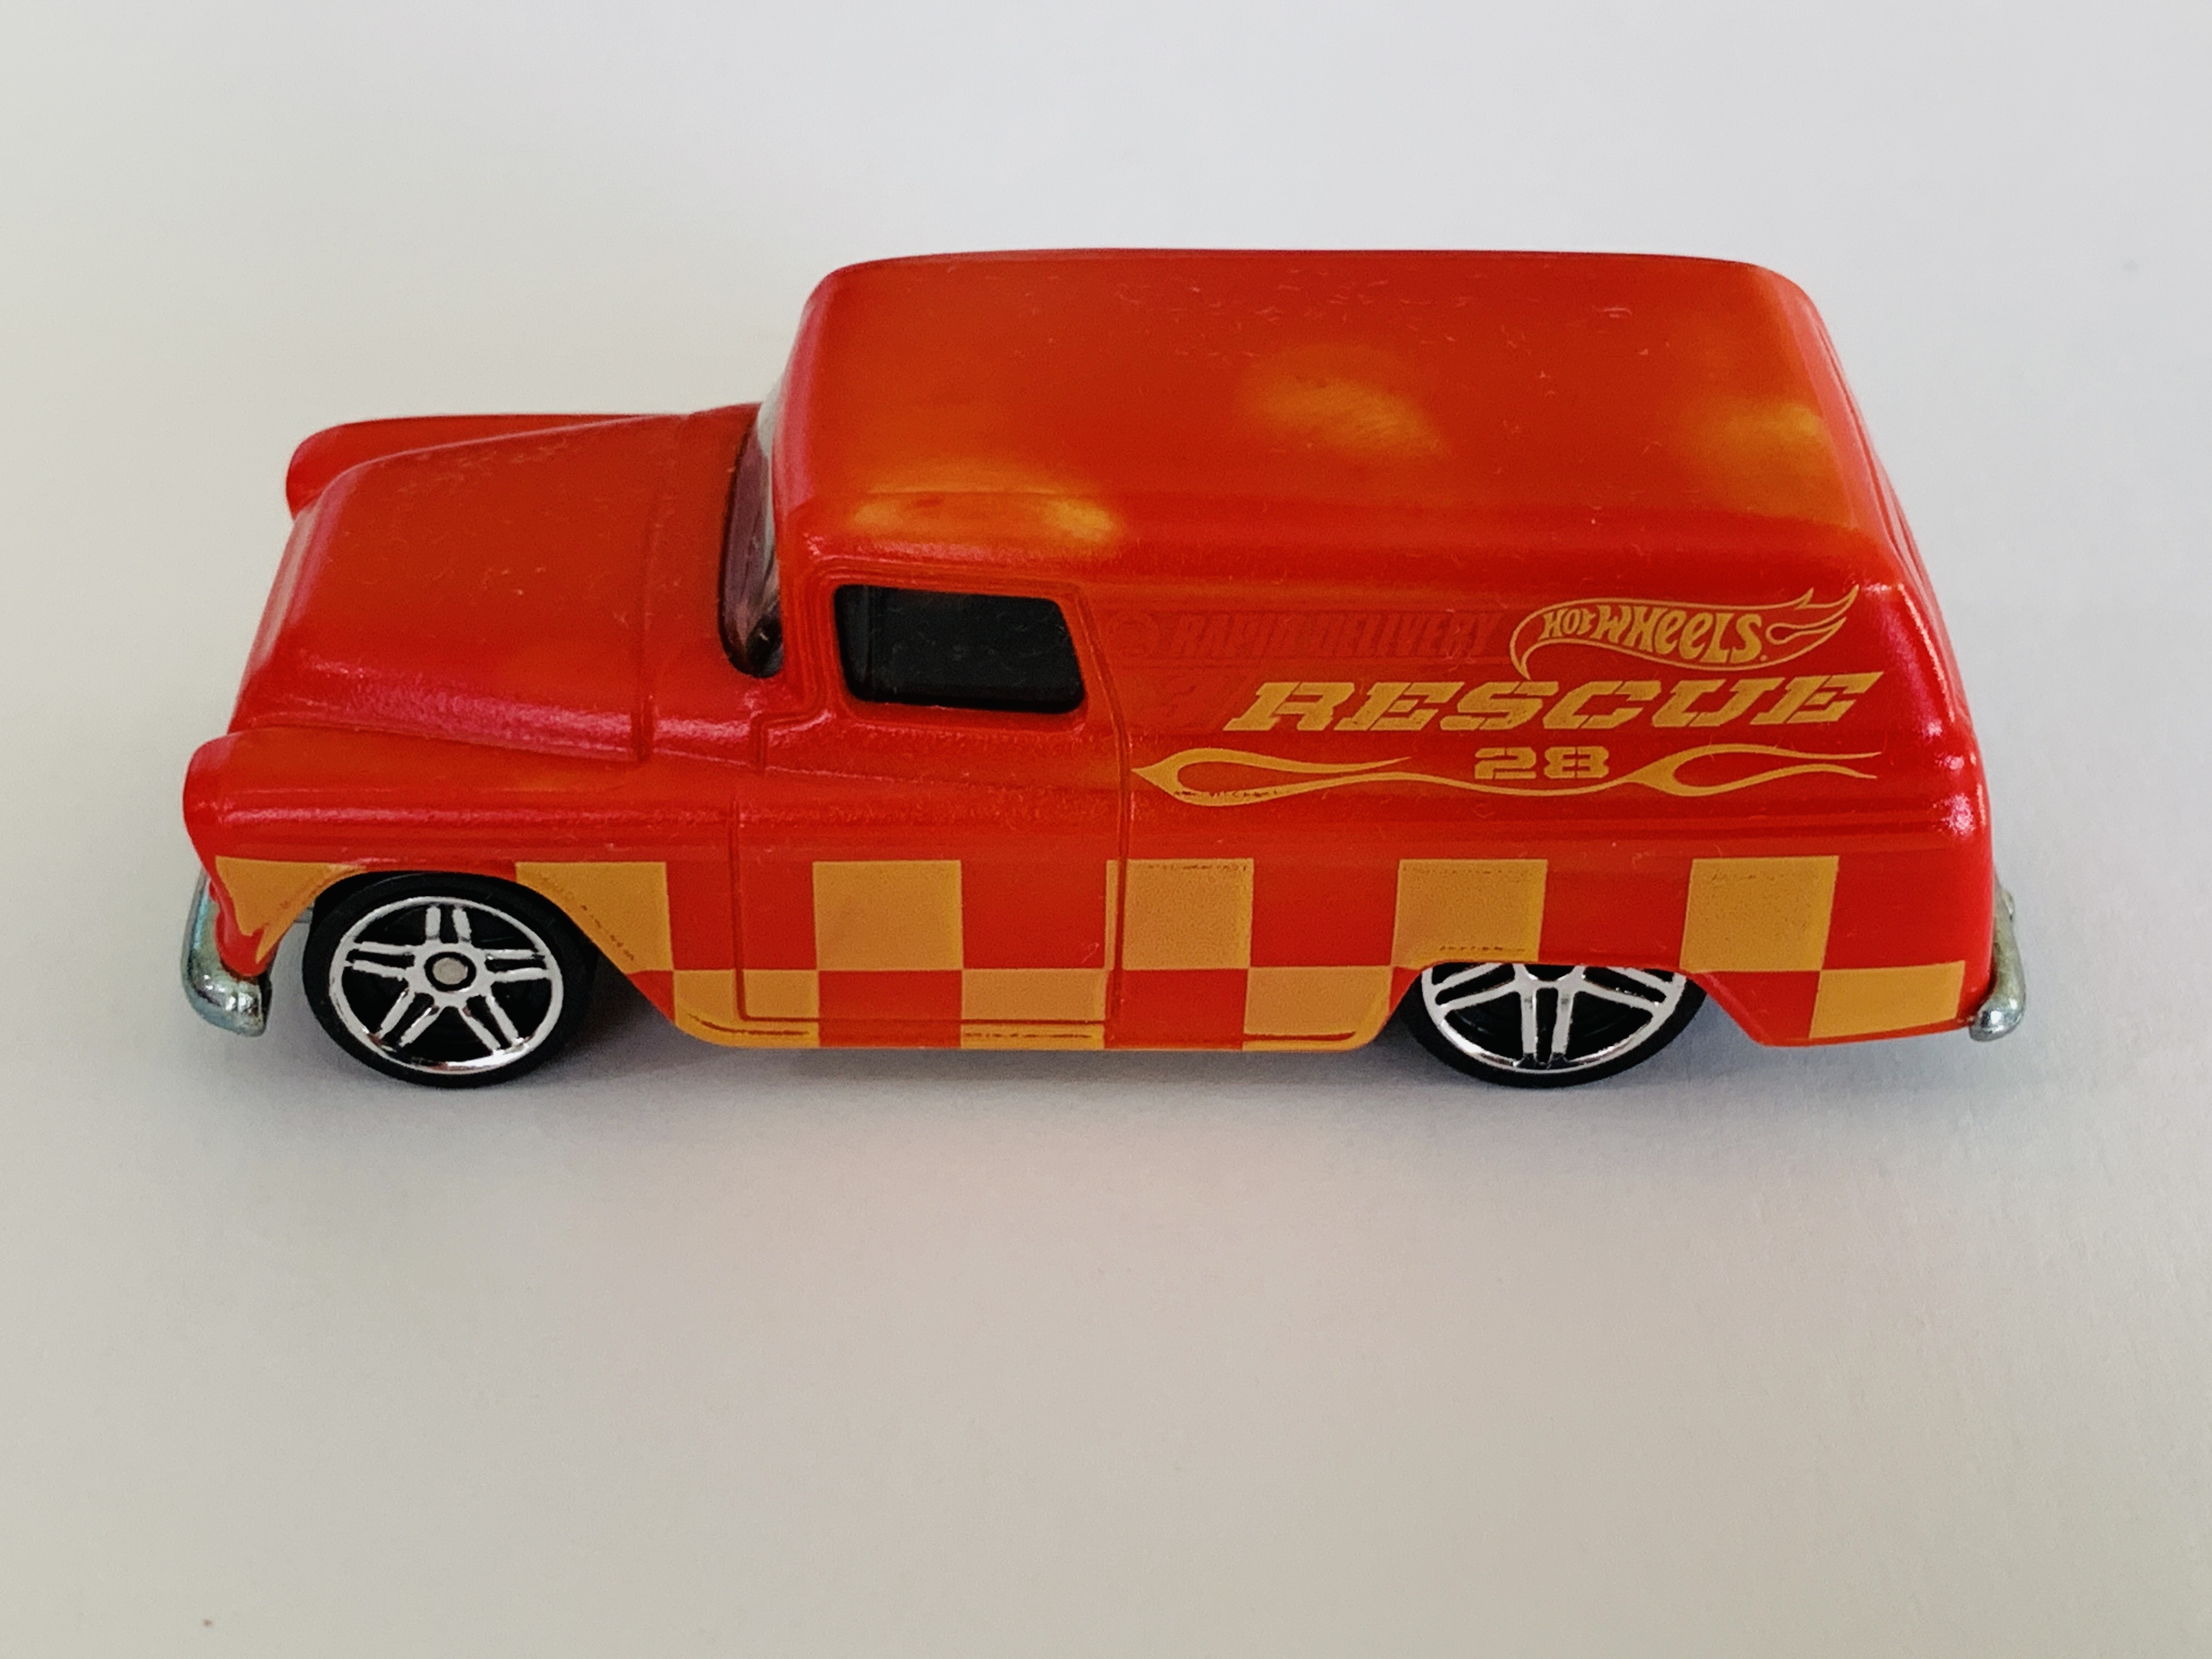 Hot Wheels Color Shifters Toy Vehicle